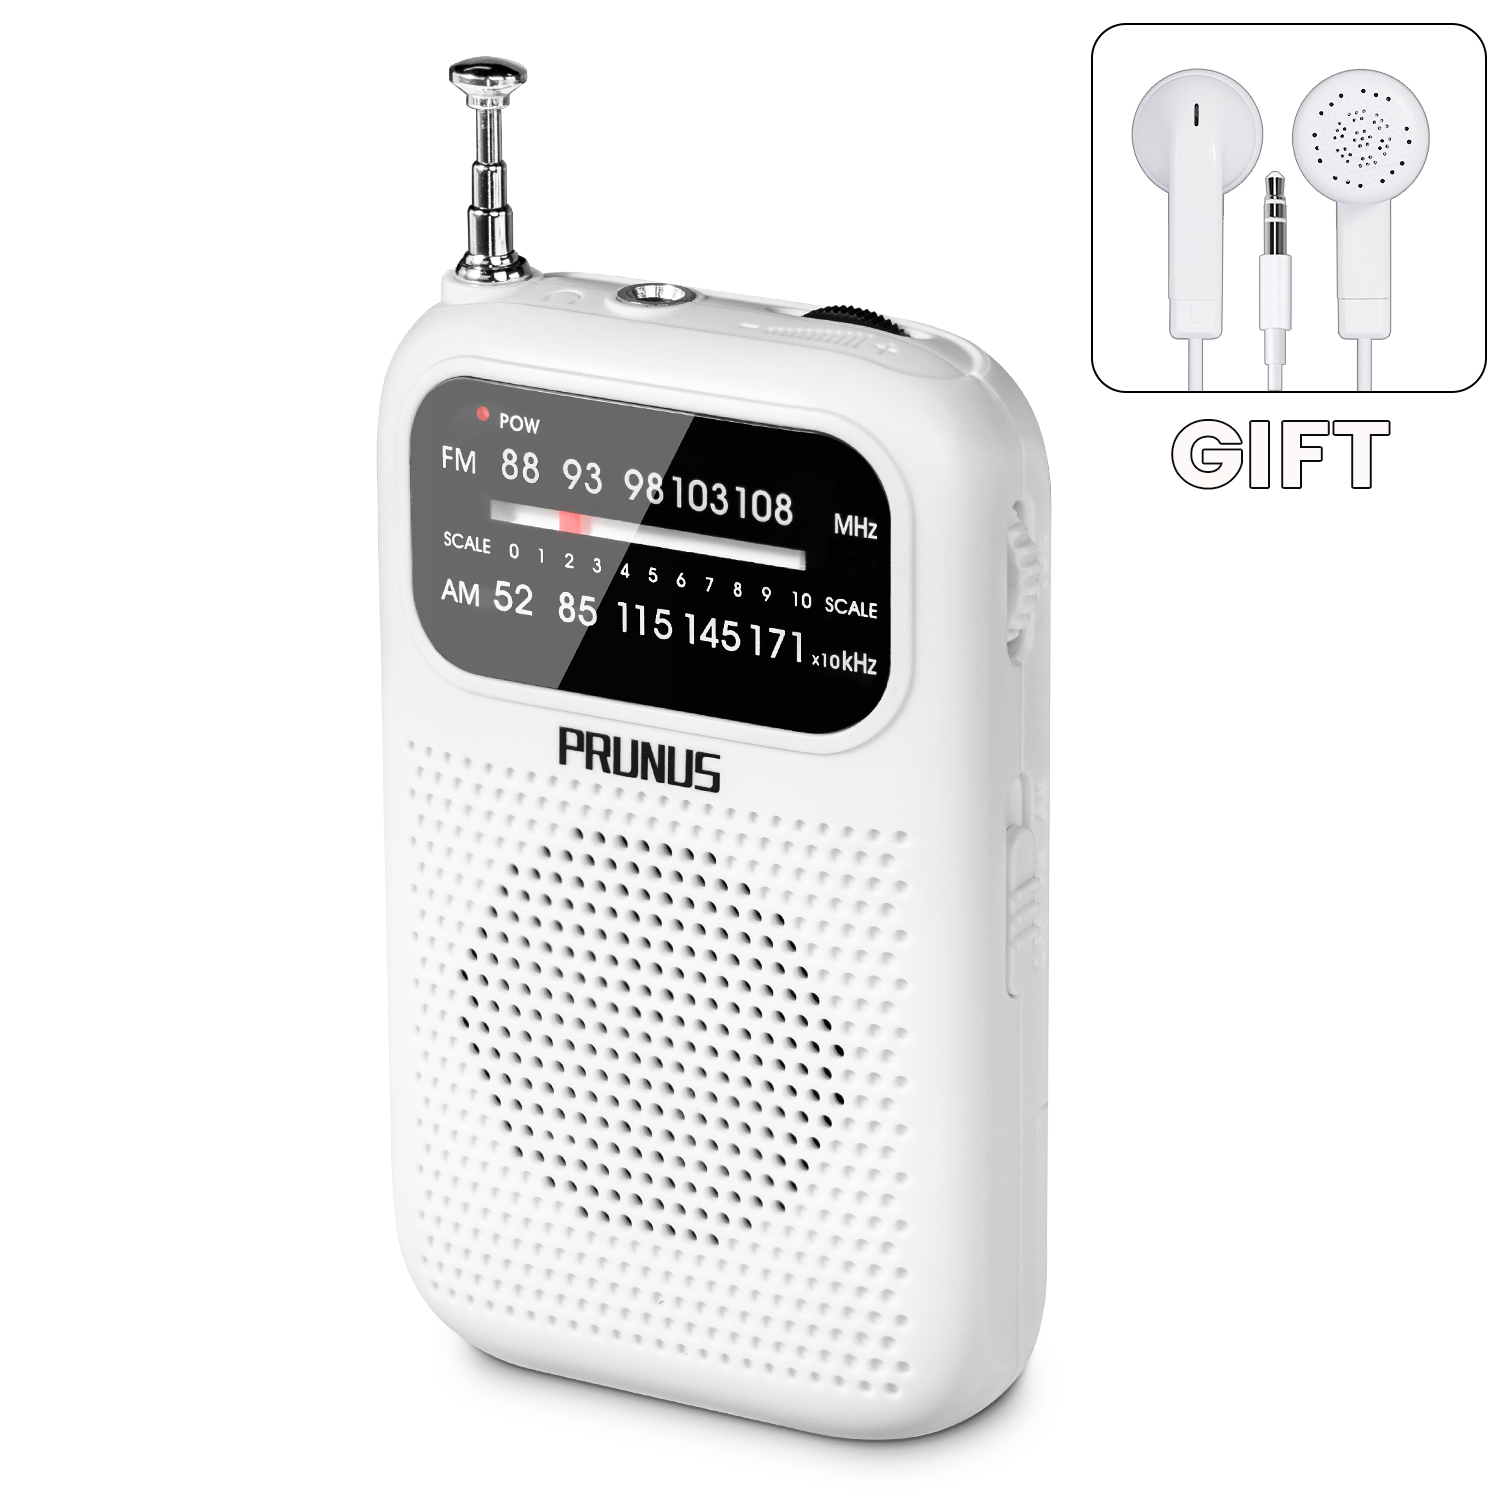 Tuning Knob with Signal Indicator PRUNUS DE333 AM FM Pocket Radio Portable Transistor Radio with Excellent Reception AAA Battery Operated